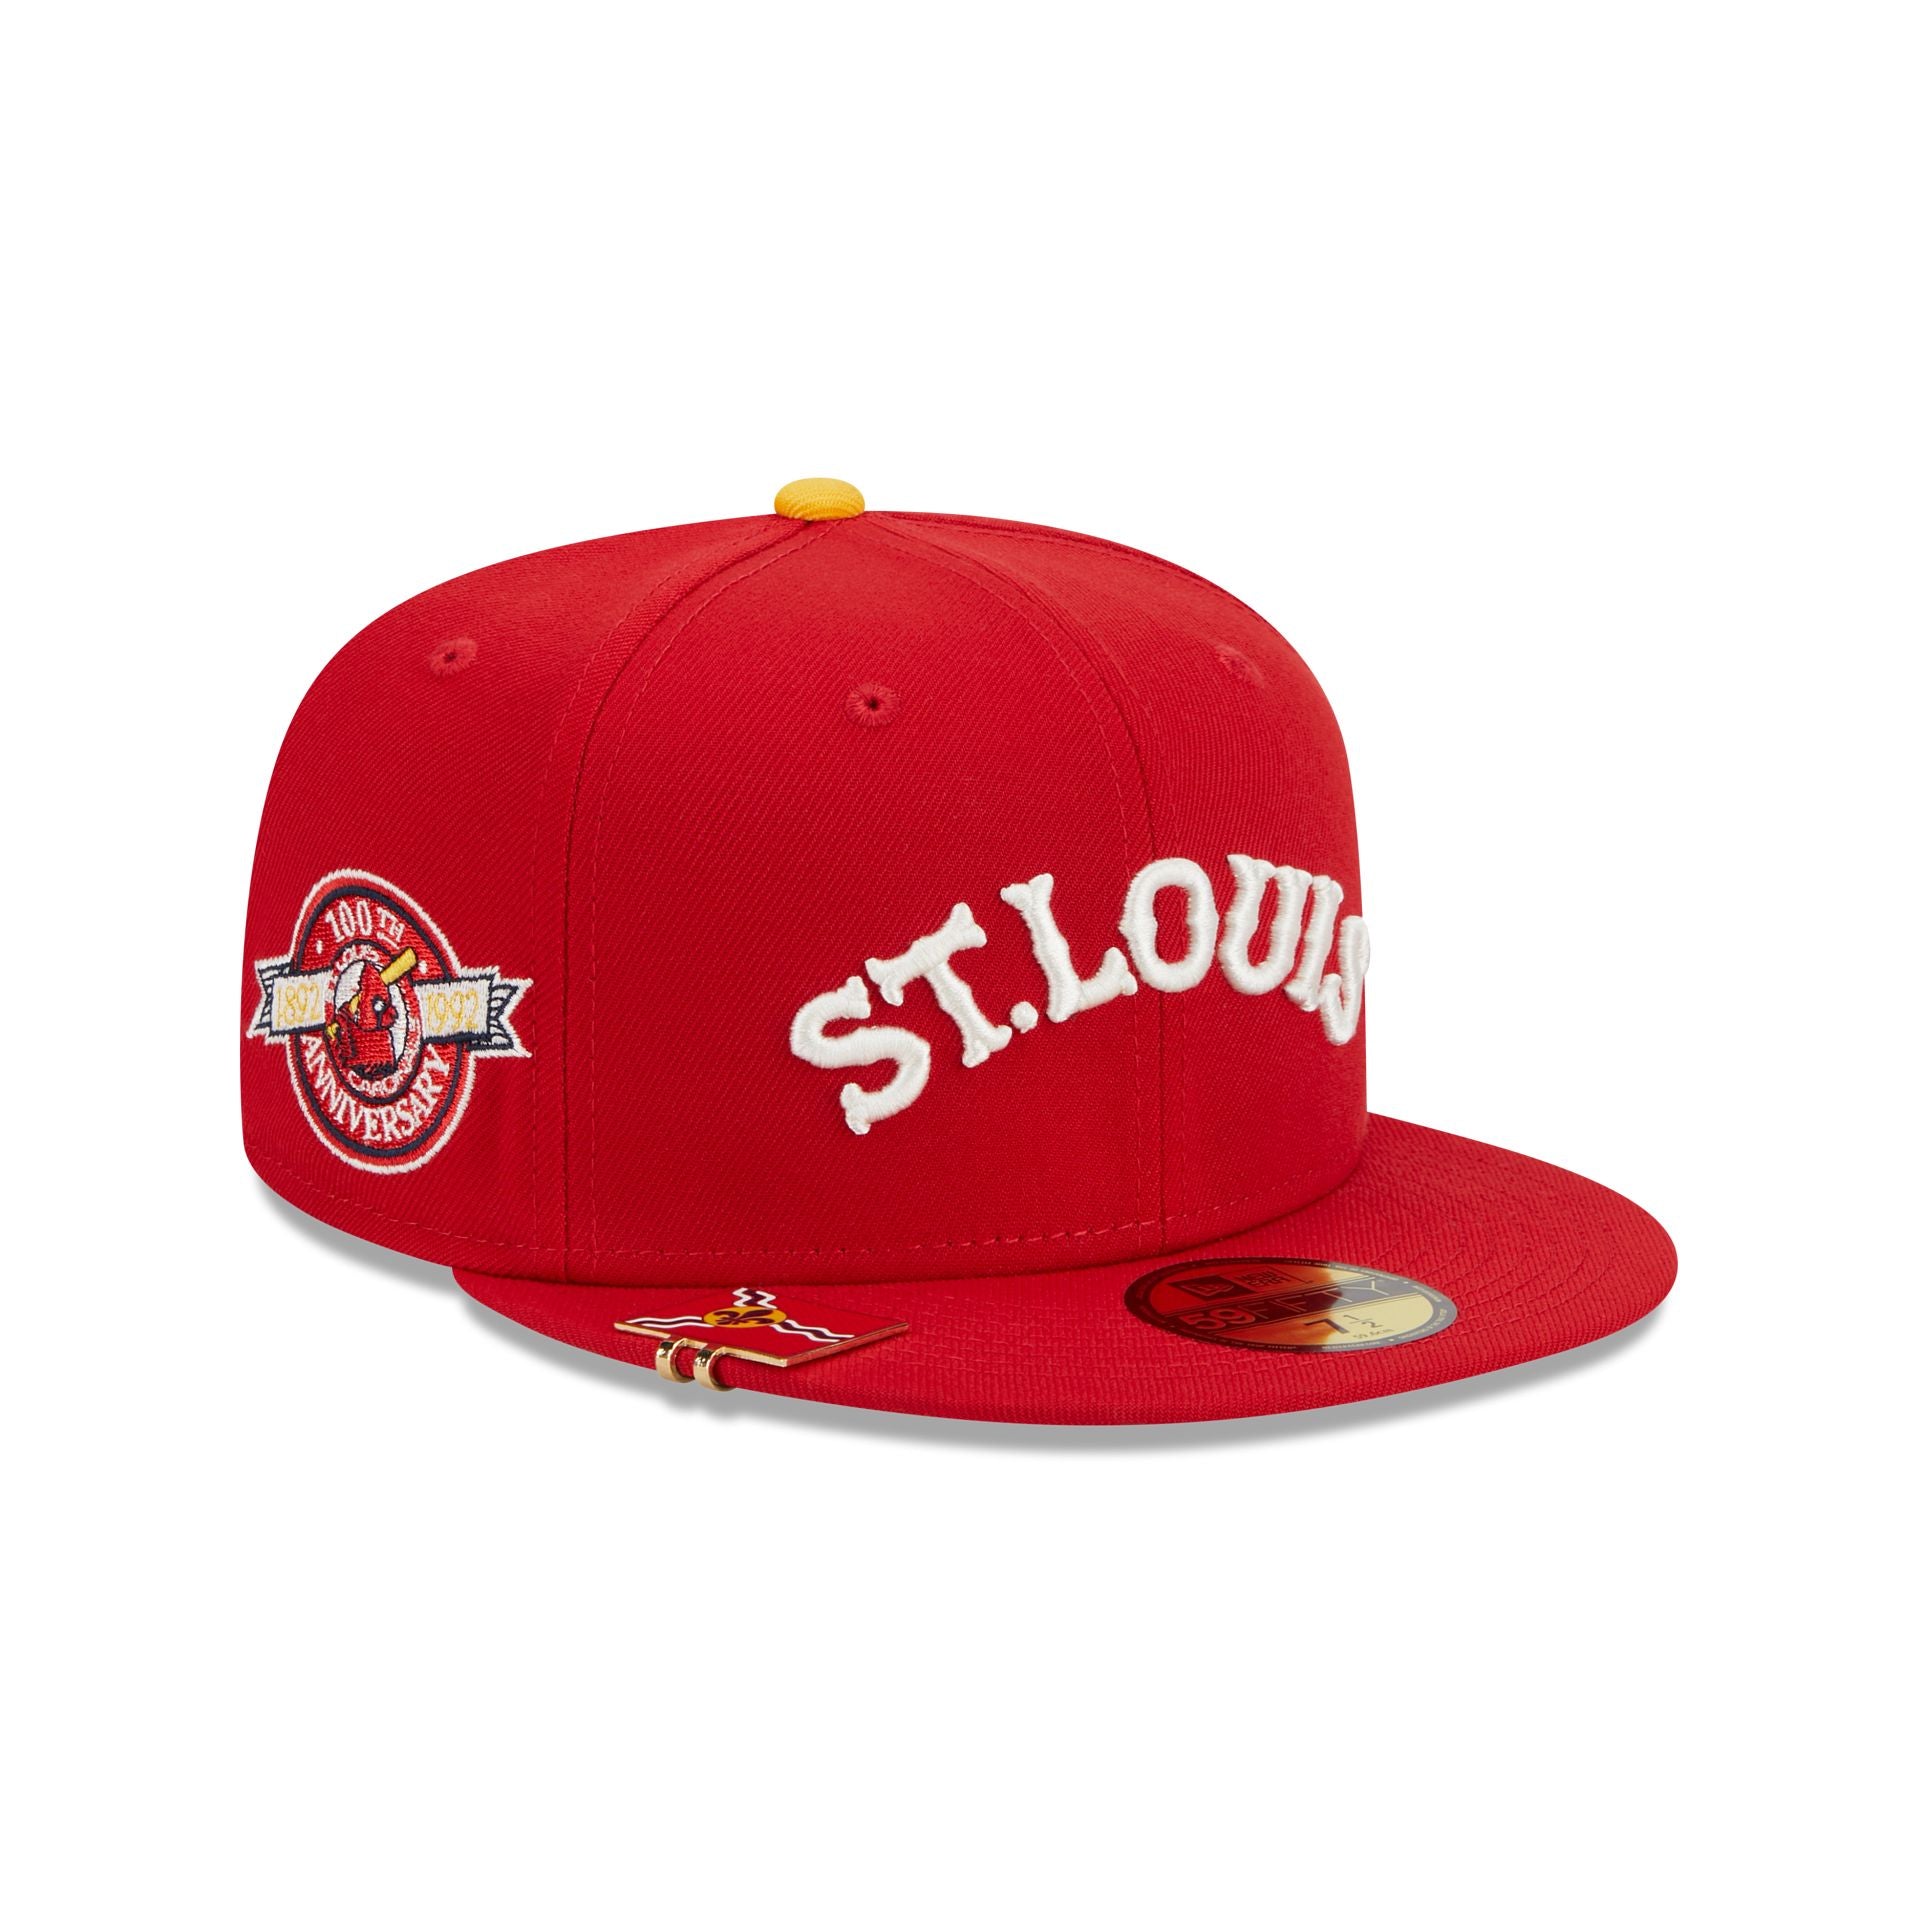 St. Louis Cardinals City Flag 59FIFTY Fitted Hat, Red - Size: 8, MLB by New Era